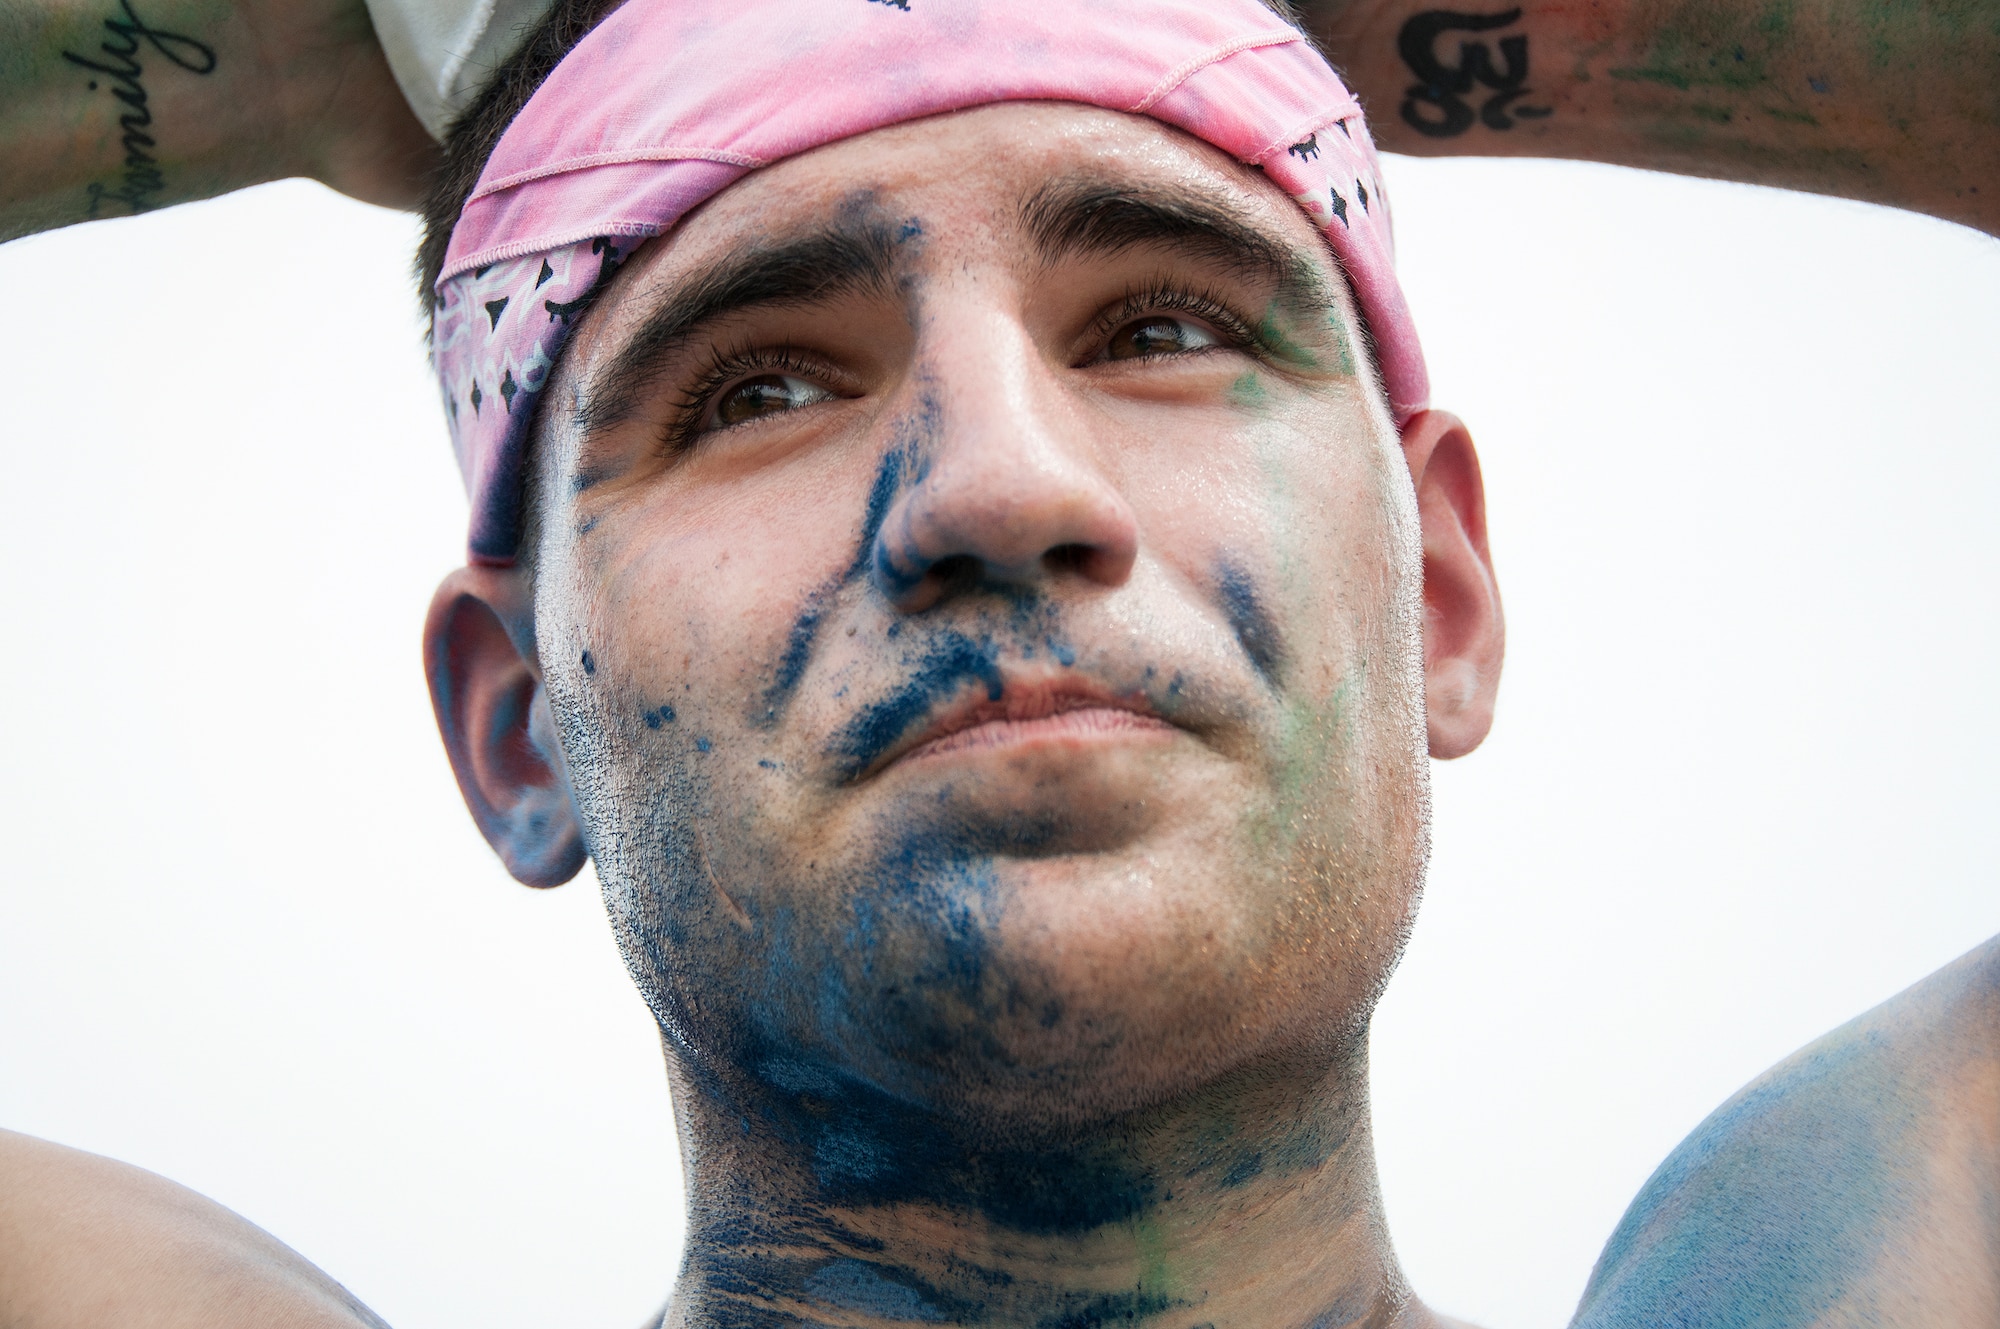 Zack Brady, of the 96th Aerospace Medicine Squadron, finished in first place during the Color Me Aware fun run, April 4, at Eglin Air Force Base, Fla.  Approximately 30 volunteers helped more than 450 participants get colorful during three color zones of the three-mile run.  The event highlighted the start of Sexual Assault Awareness Month. (U.S. Air Force photo/Tech. Sgt. Jasmin Taylor)